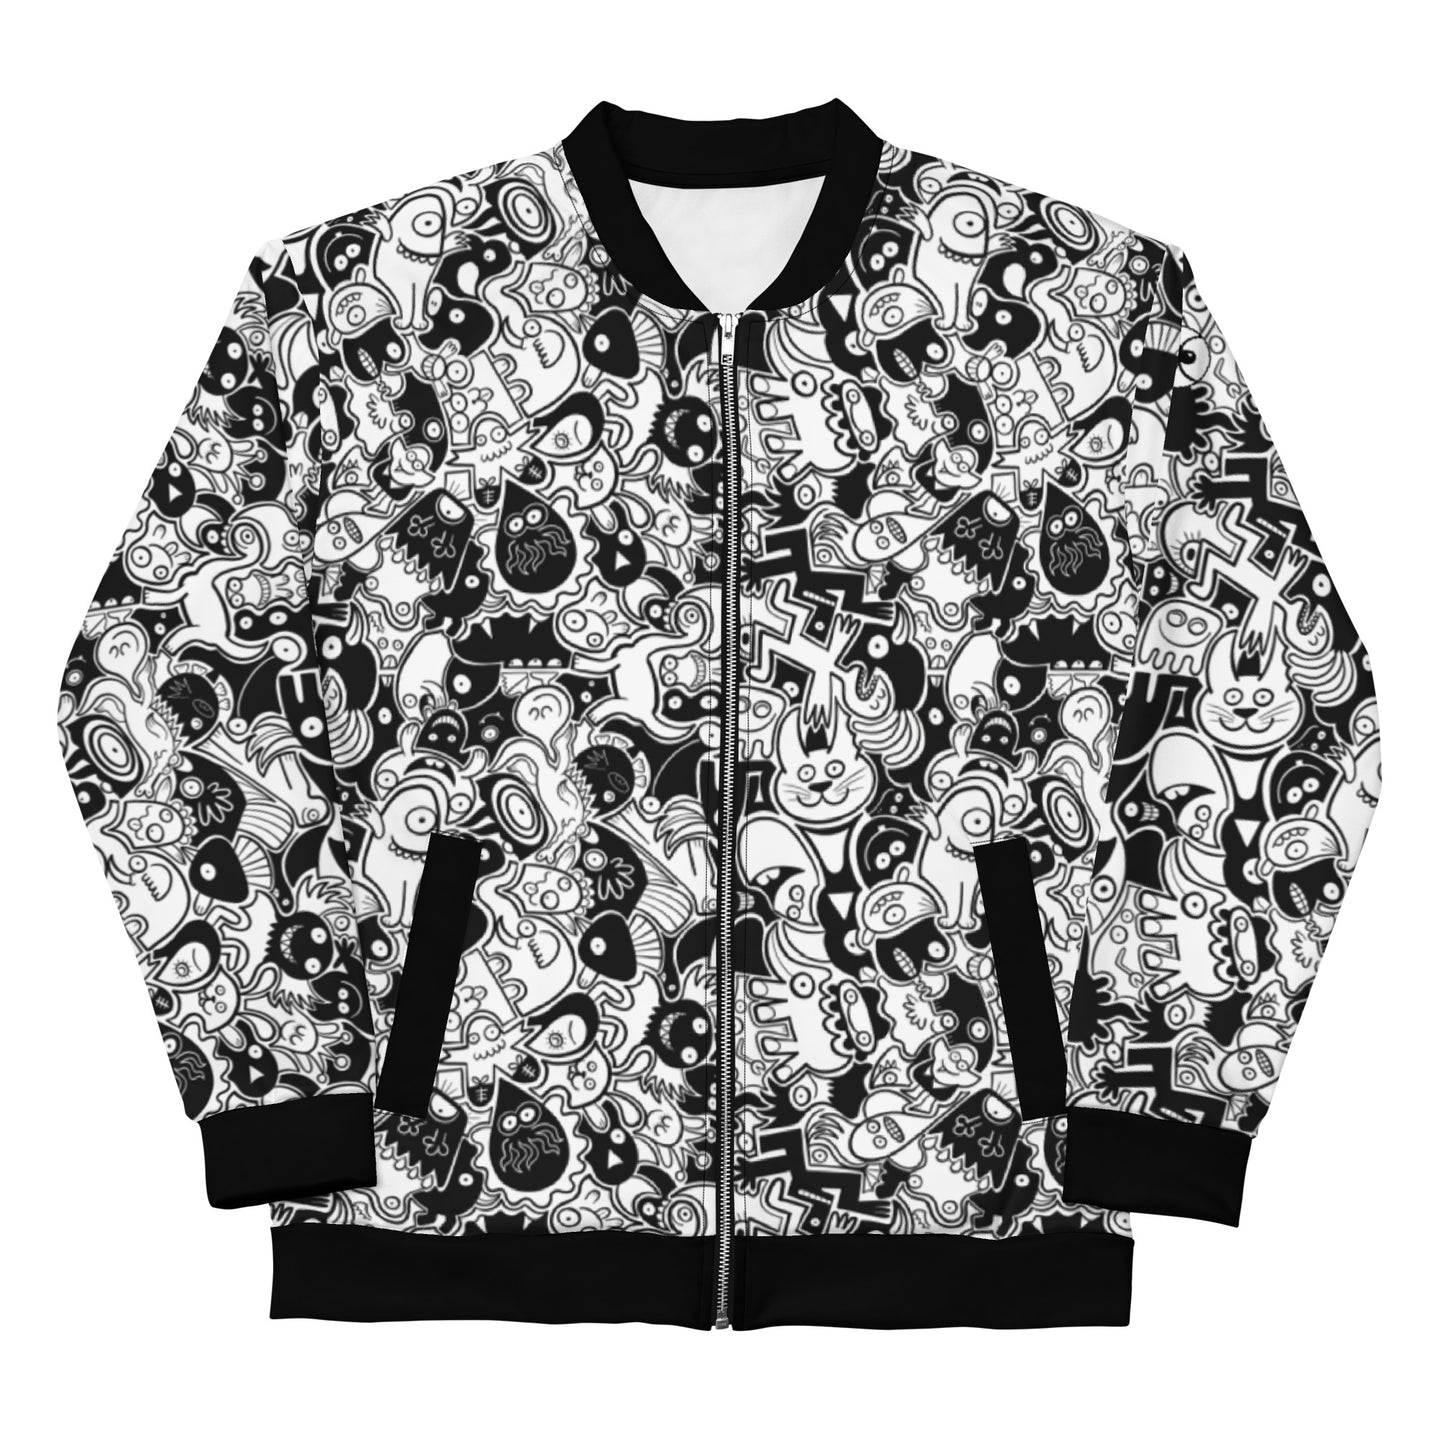 Joyful crowd of black and white doodle creatures Unisex Bomber Jacket. Front view